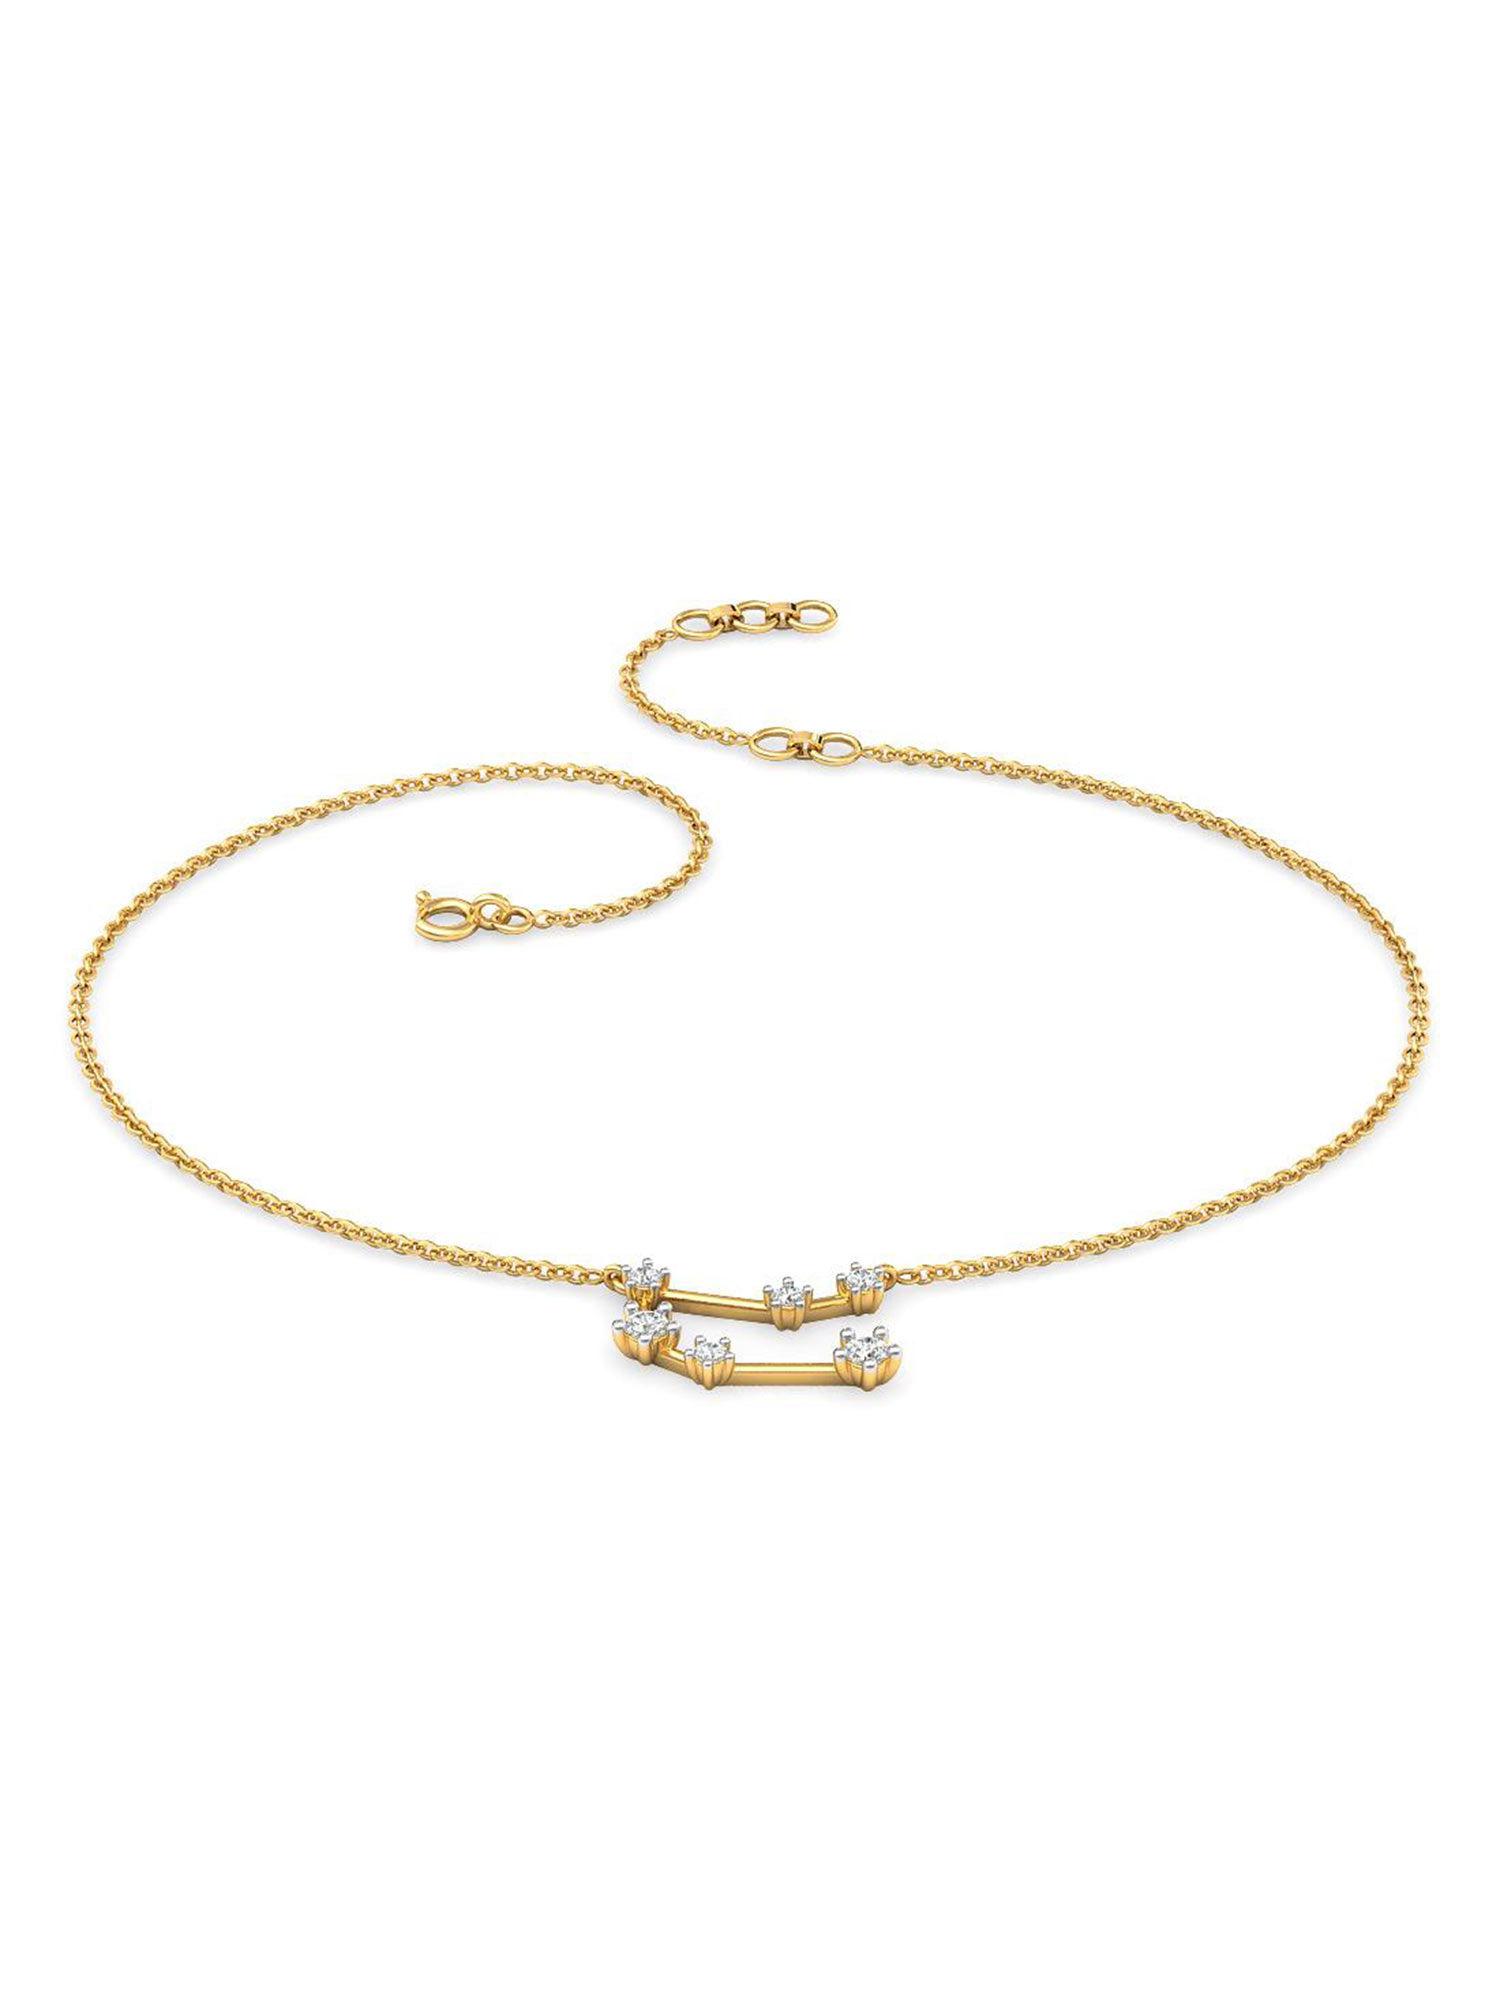 gemini 18k yellow gold and diamond anklet for women